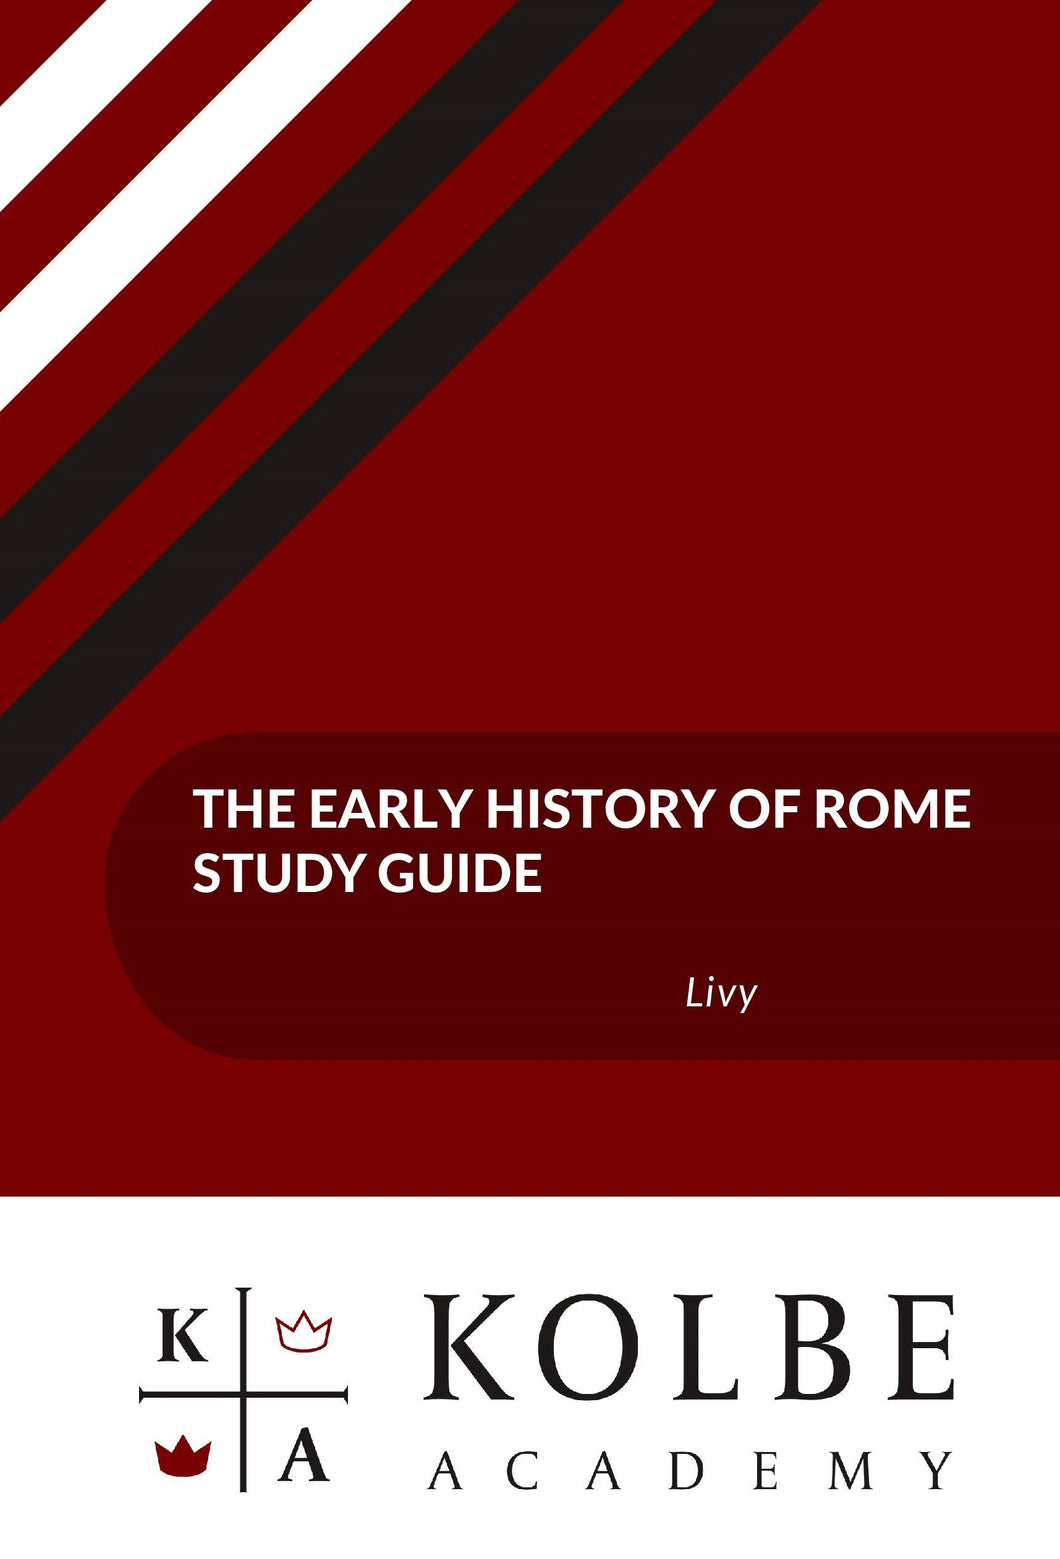 The Early History of Rome Study Guide